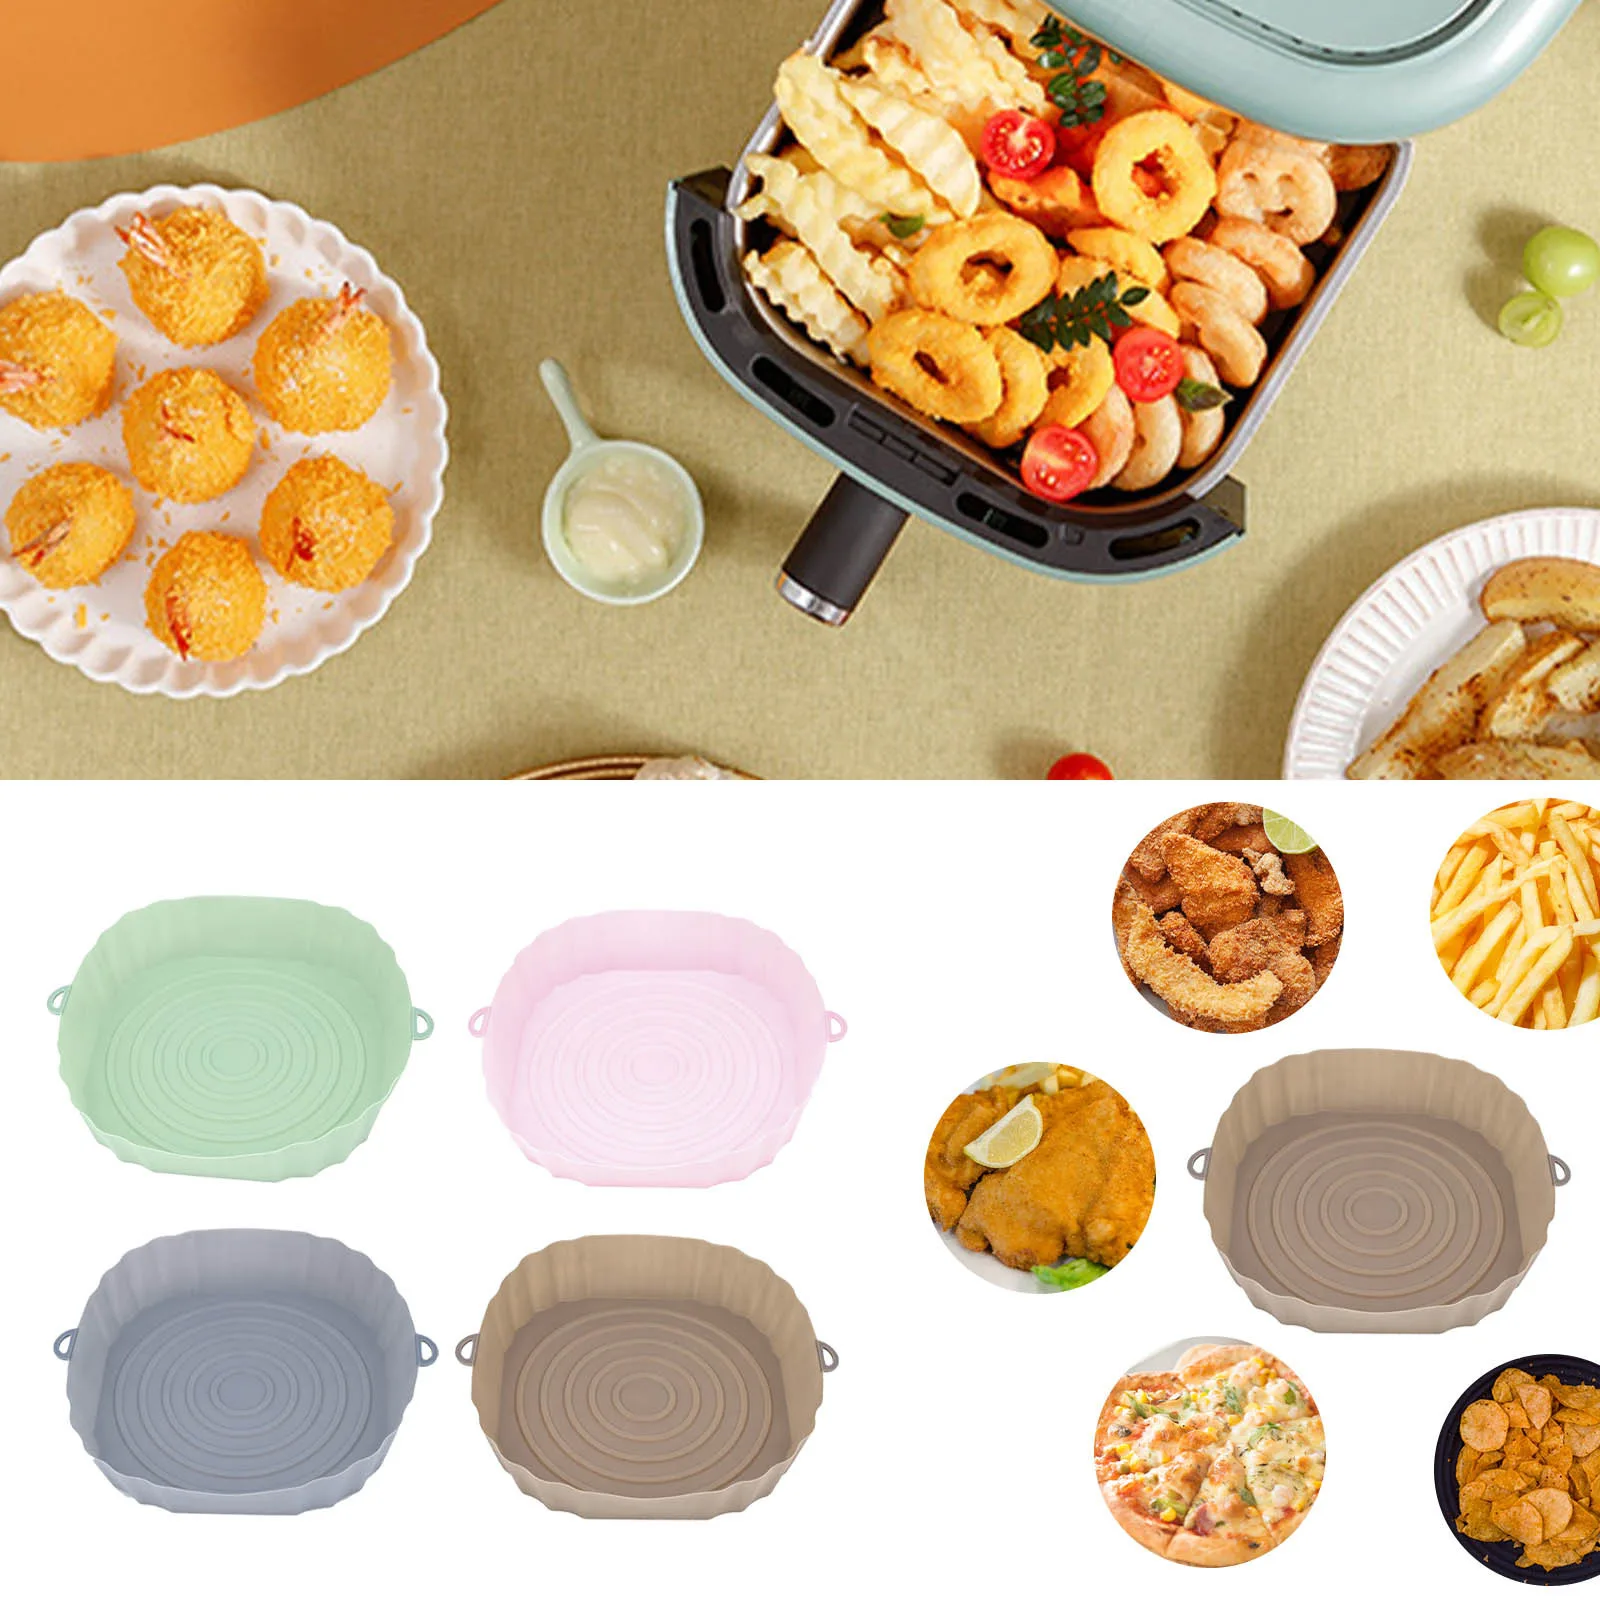 https://ae01.alicdn.com/kf/Sea27e0fe13844b63b00603d0dfb778d2f/Air-Fryer-Silicone-Basket-Airfryer-Oven-Baking-Silicone-Tray-Reusable-Airfryer-Pot-Pan-Liner-Mold-Pizza.jpg